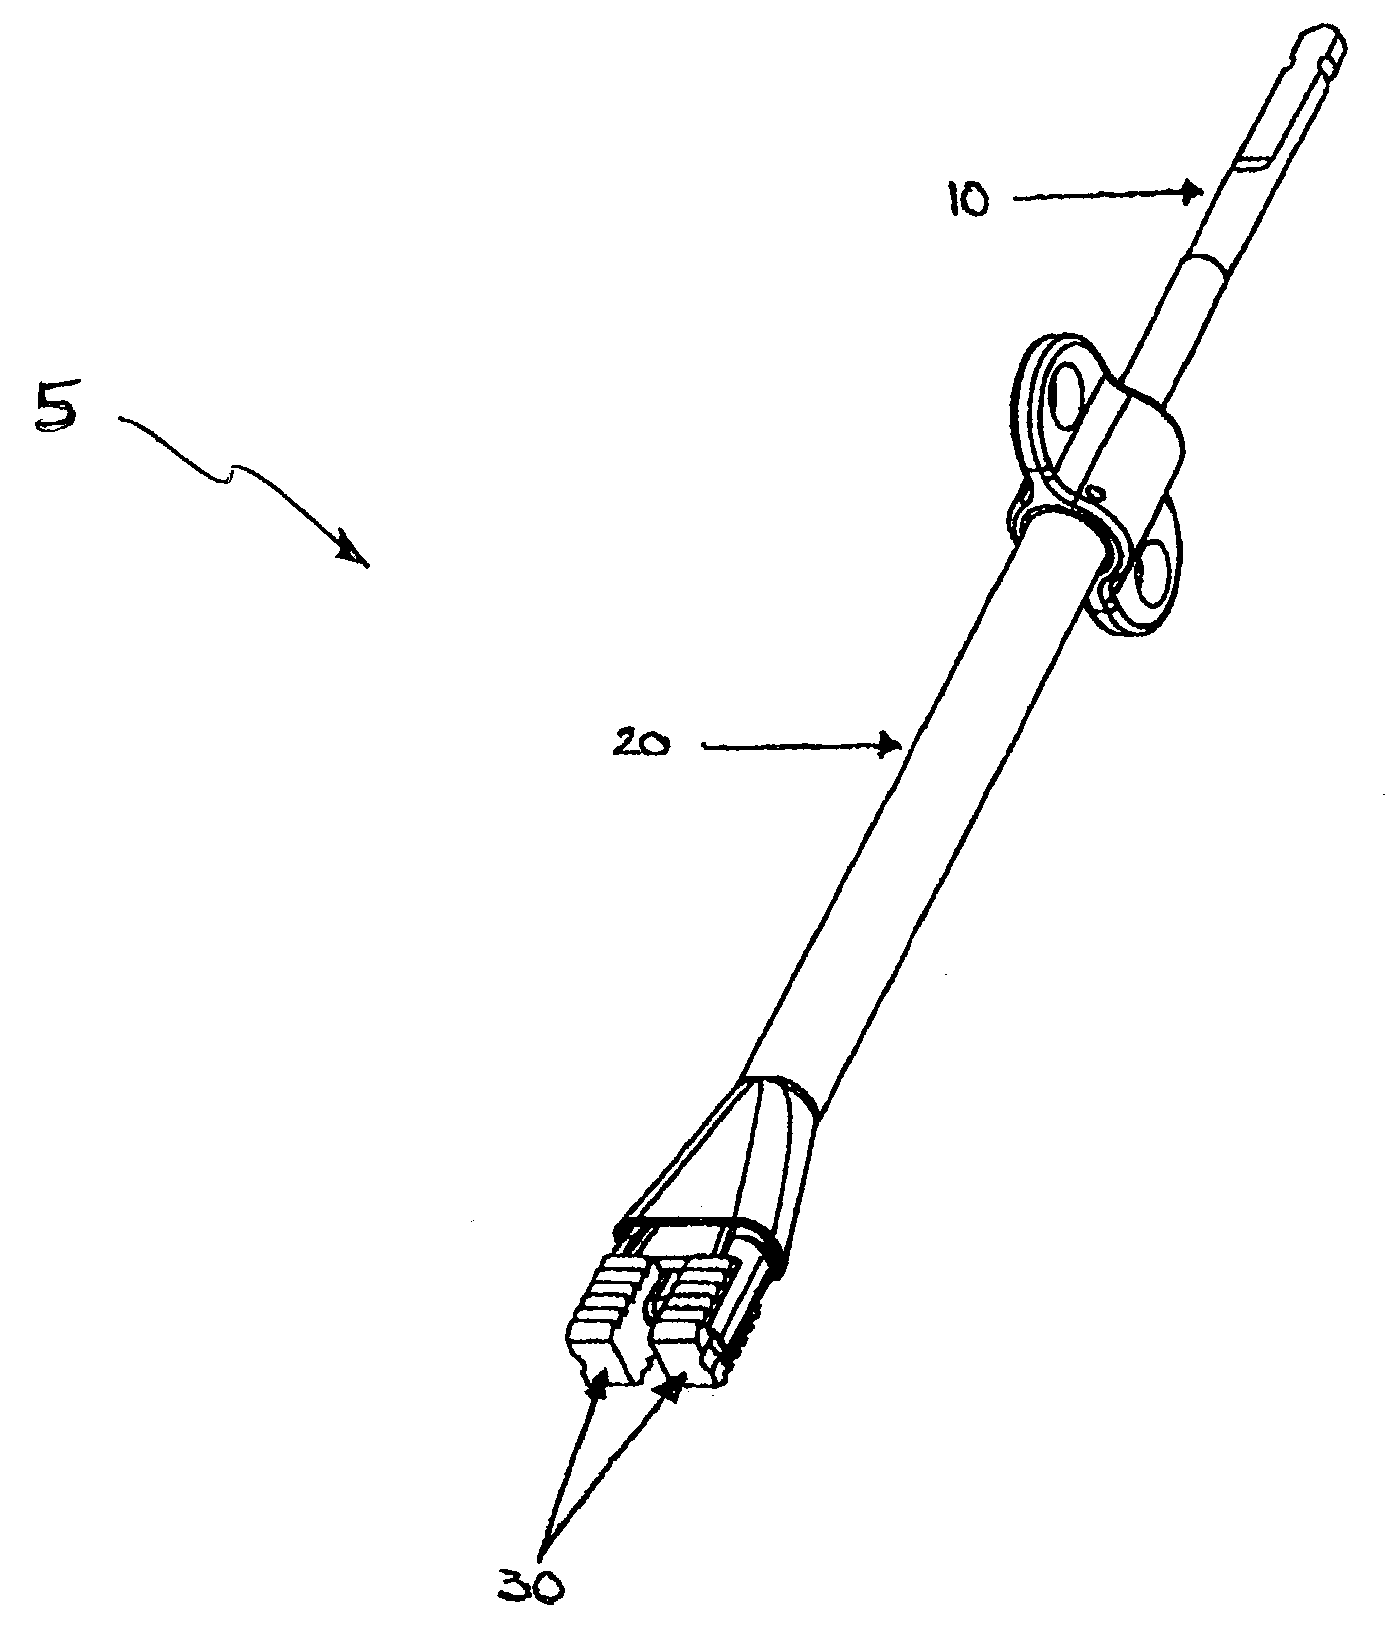 System and method for performing spinal fusion